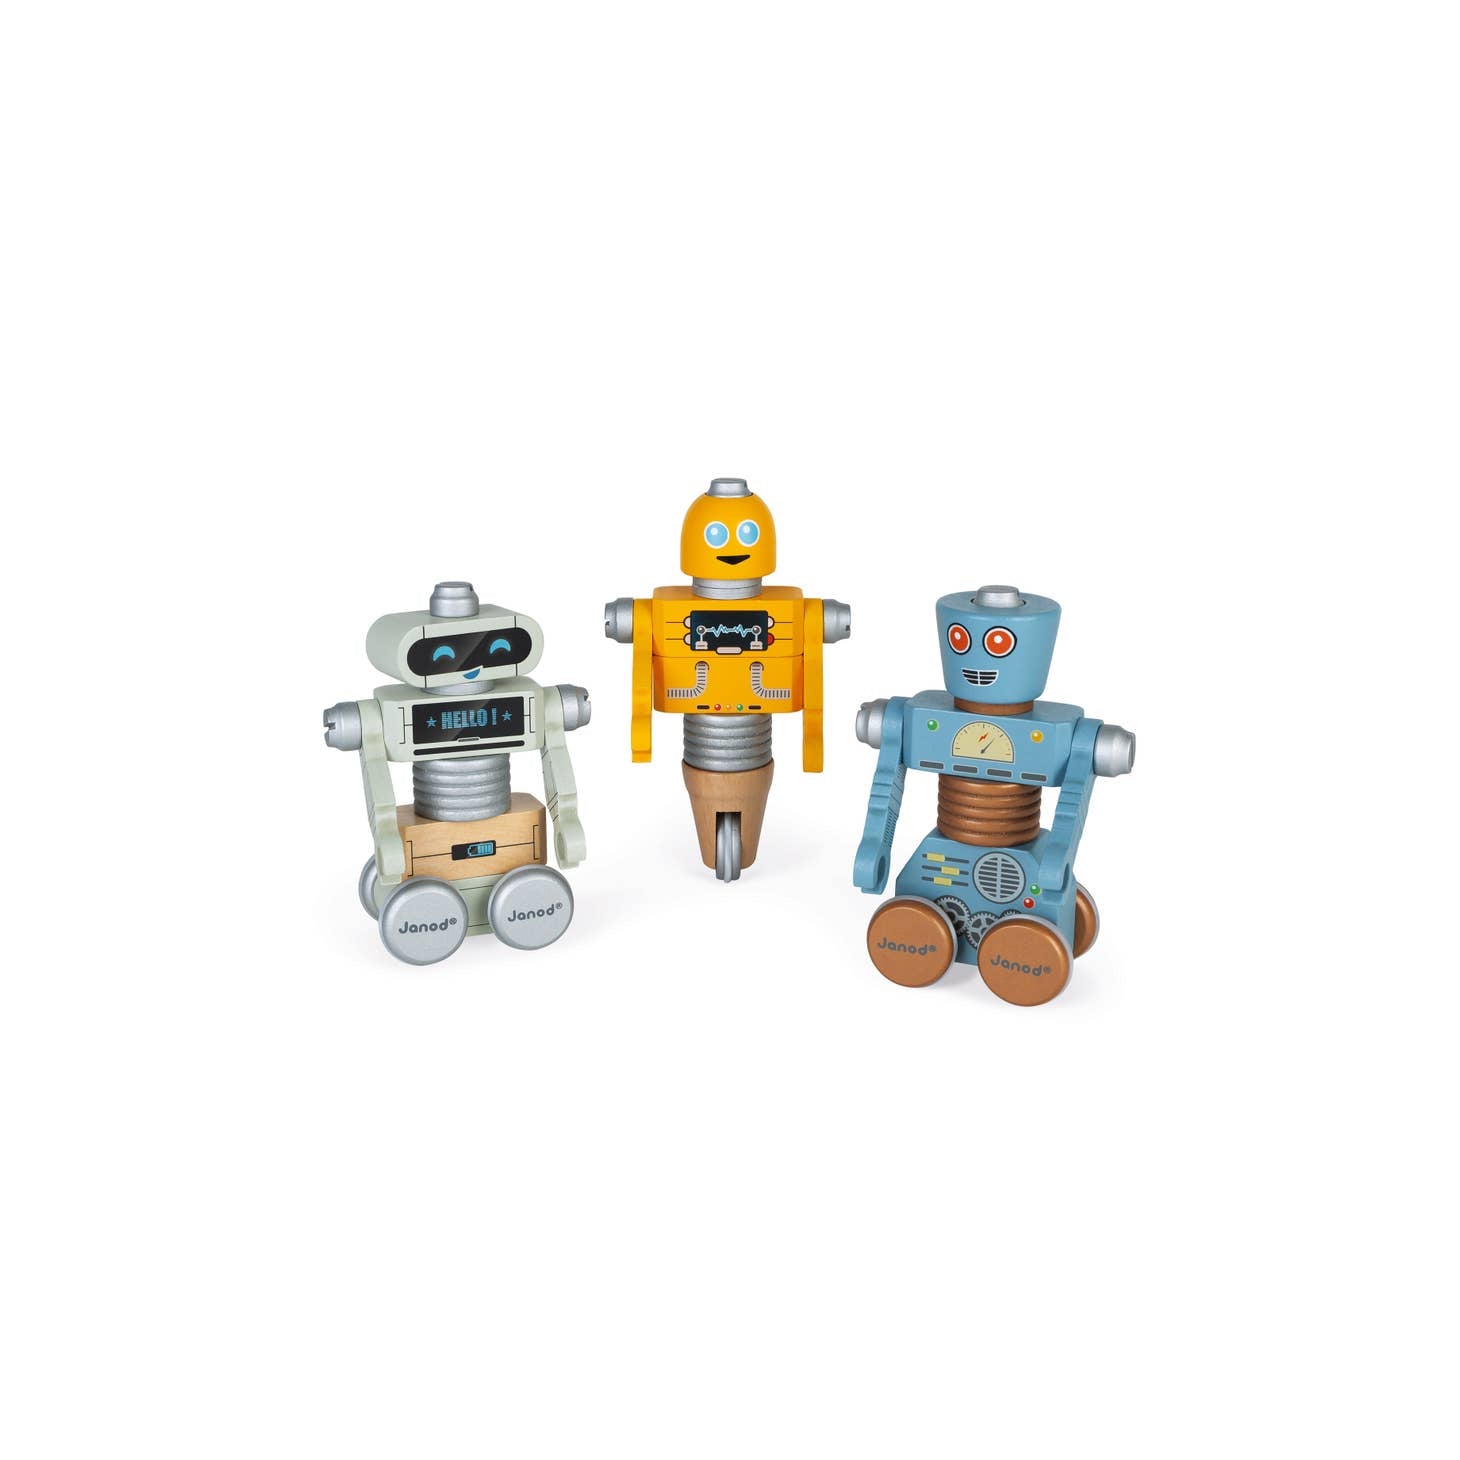 janod diy robots / 3 awesome robots to assemble, disassemble, and mix and match at will with the wooden screwdriver provided.  53 interchangeable pieces for lots of creative possibilities. An activity that develops your child’s fine motor skills, in addition to their imagination!